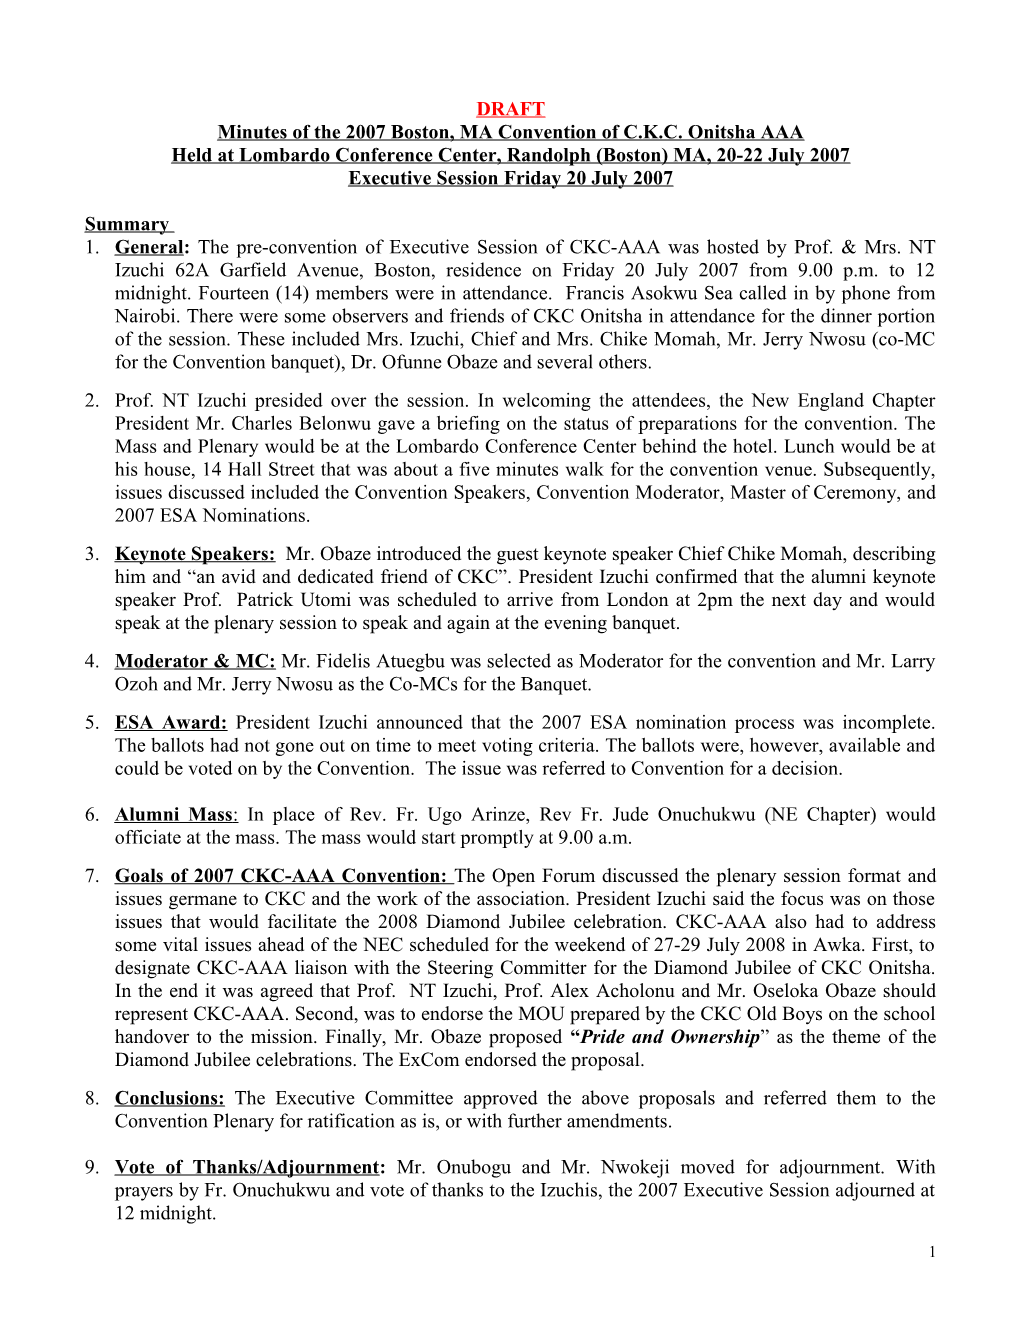 Minutes of the 2007 Boston, MA Convention of C.K.C. Onitsha AAA